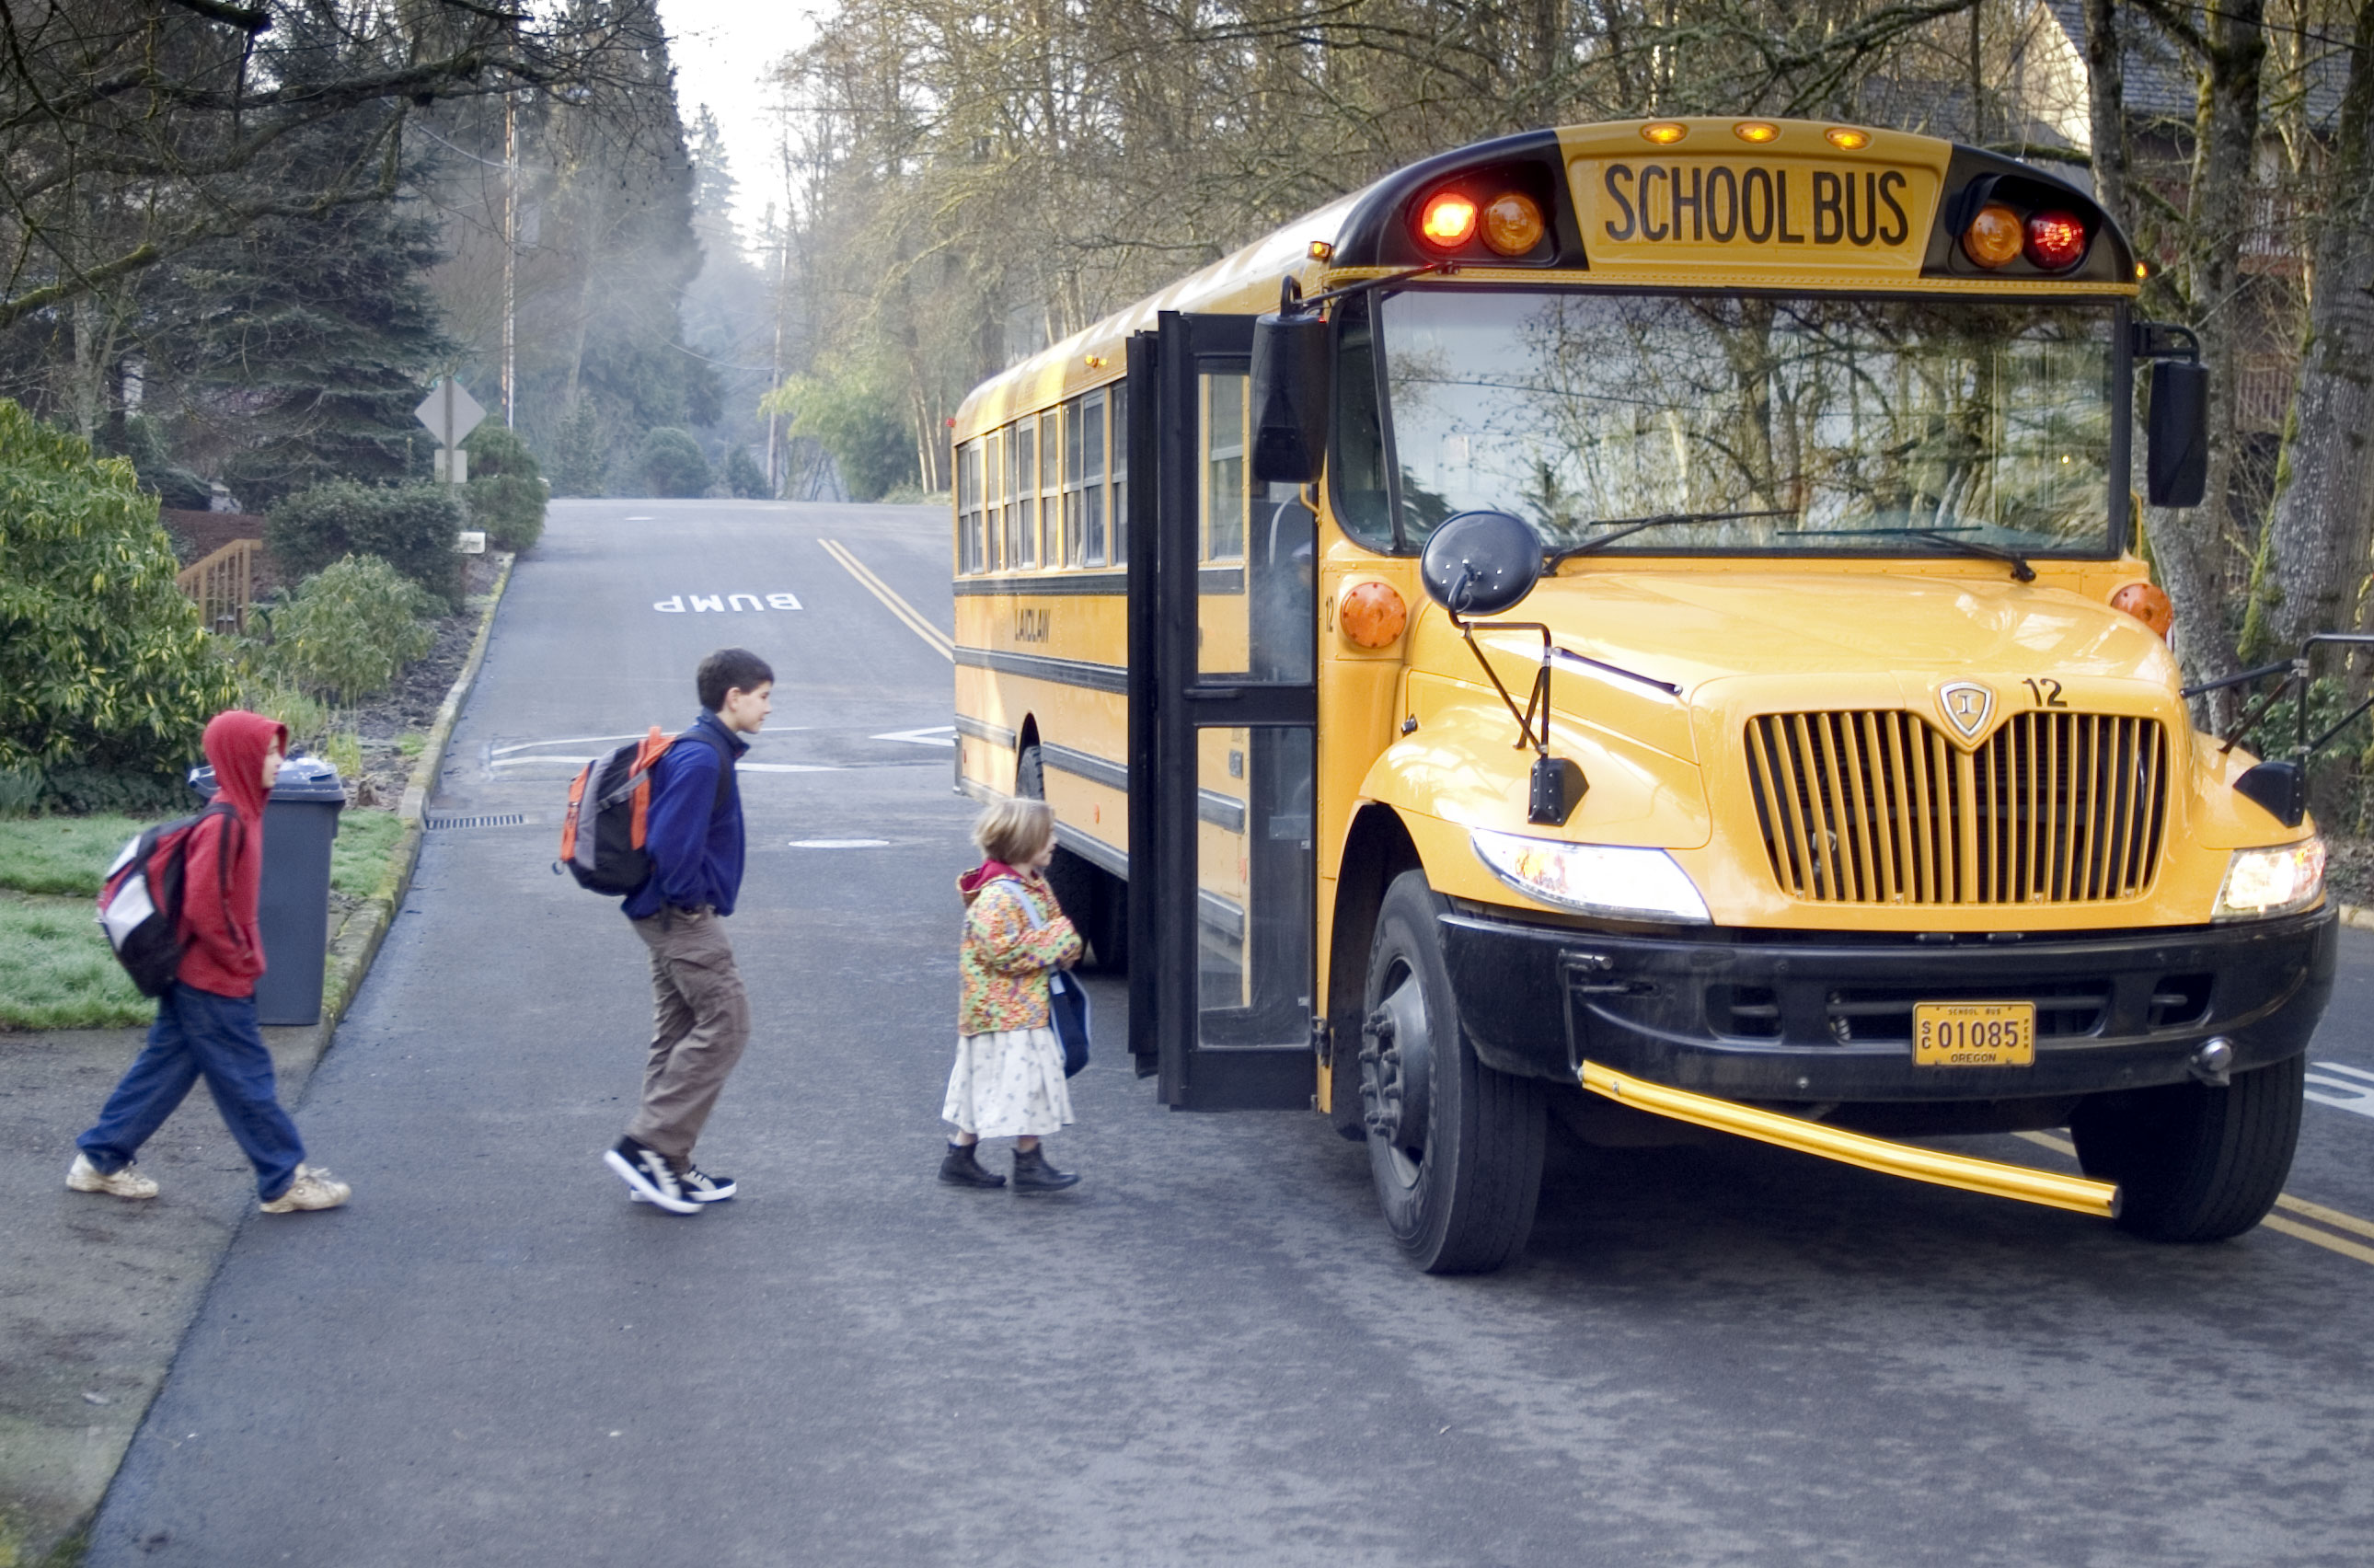 School Buses to come back? — The Sims Forums